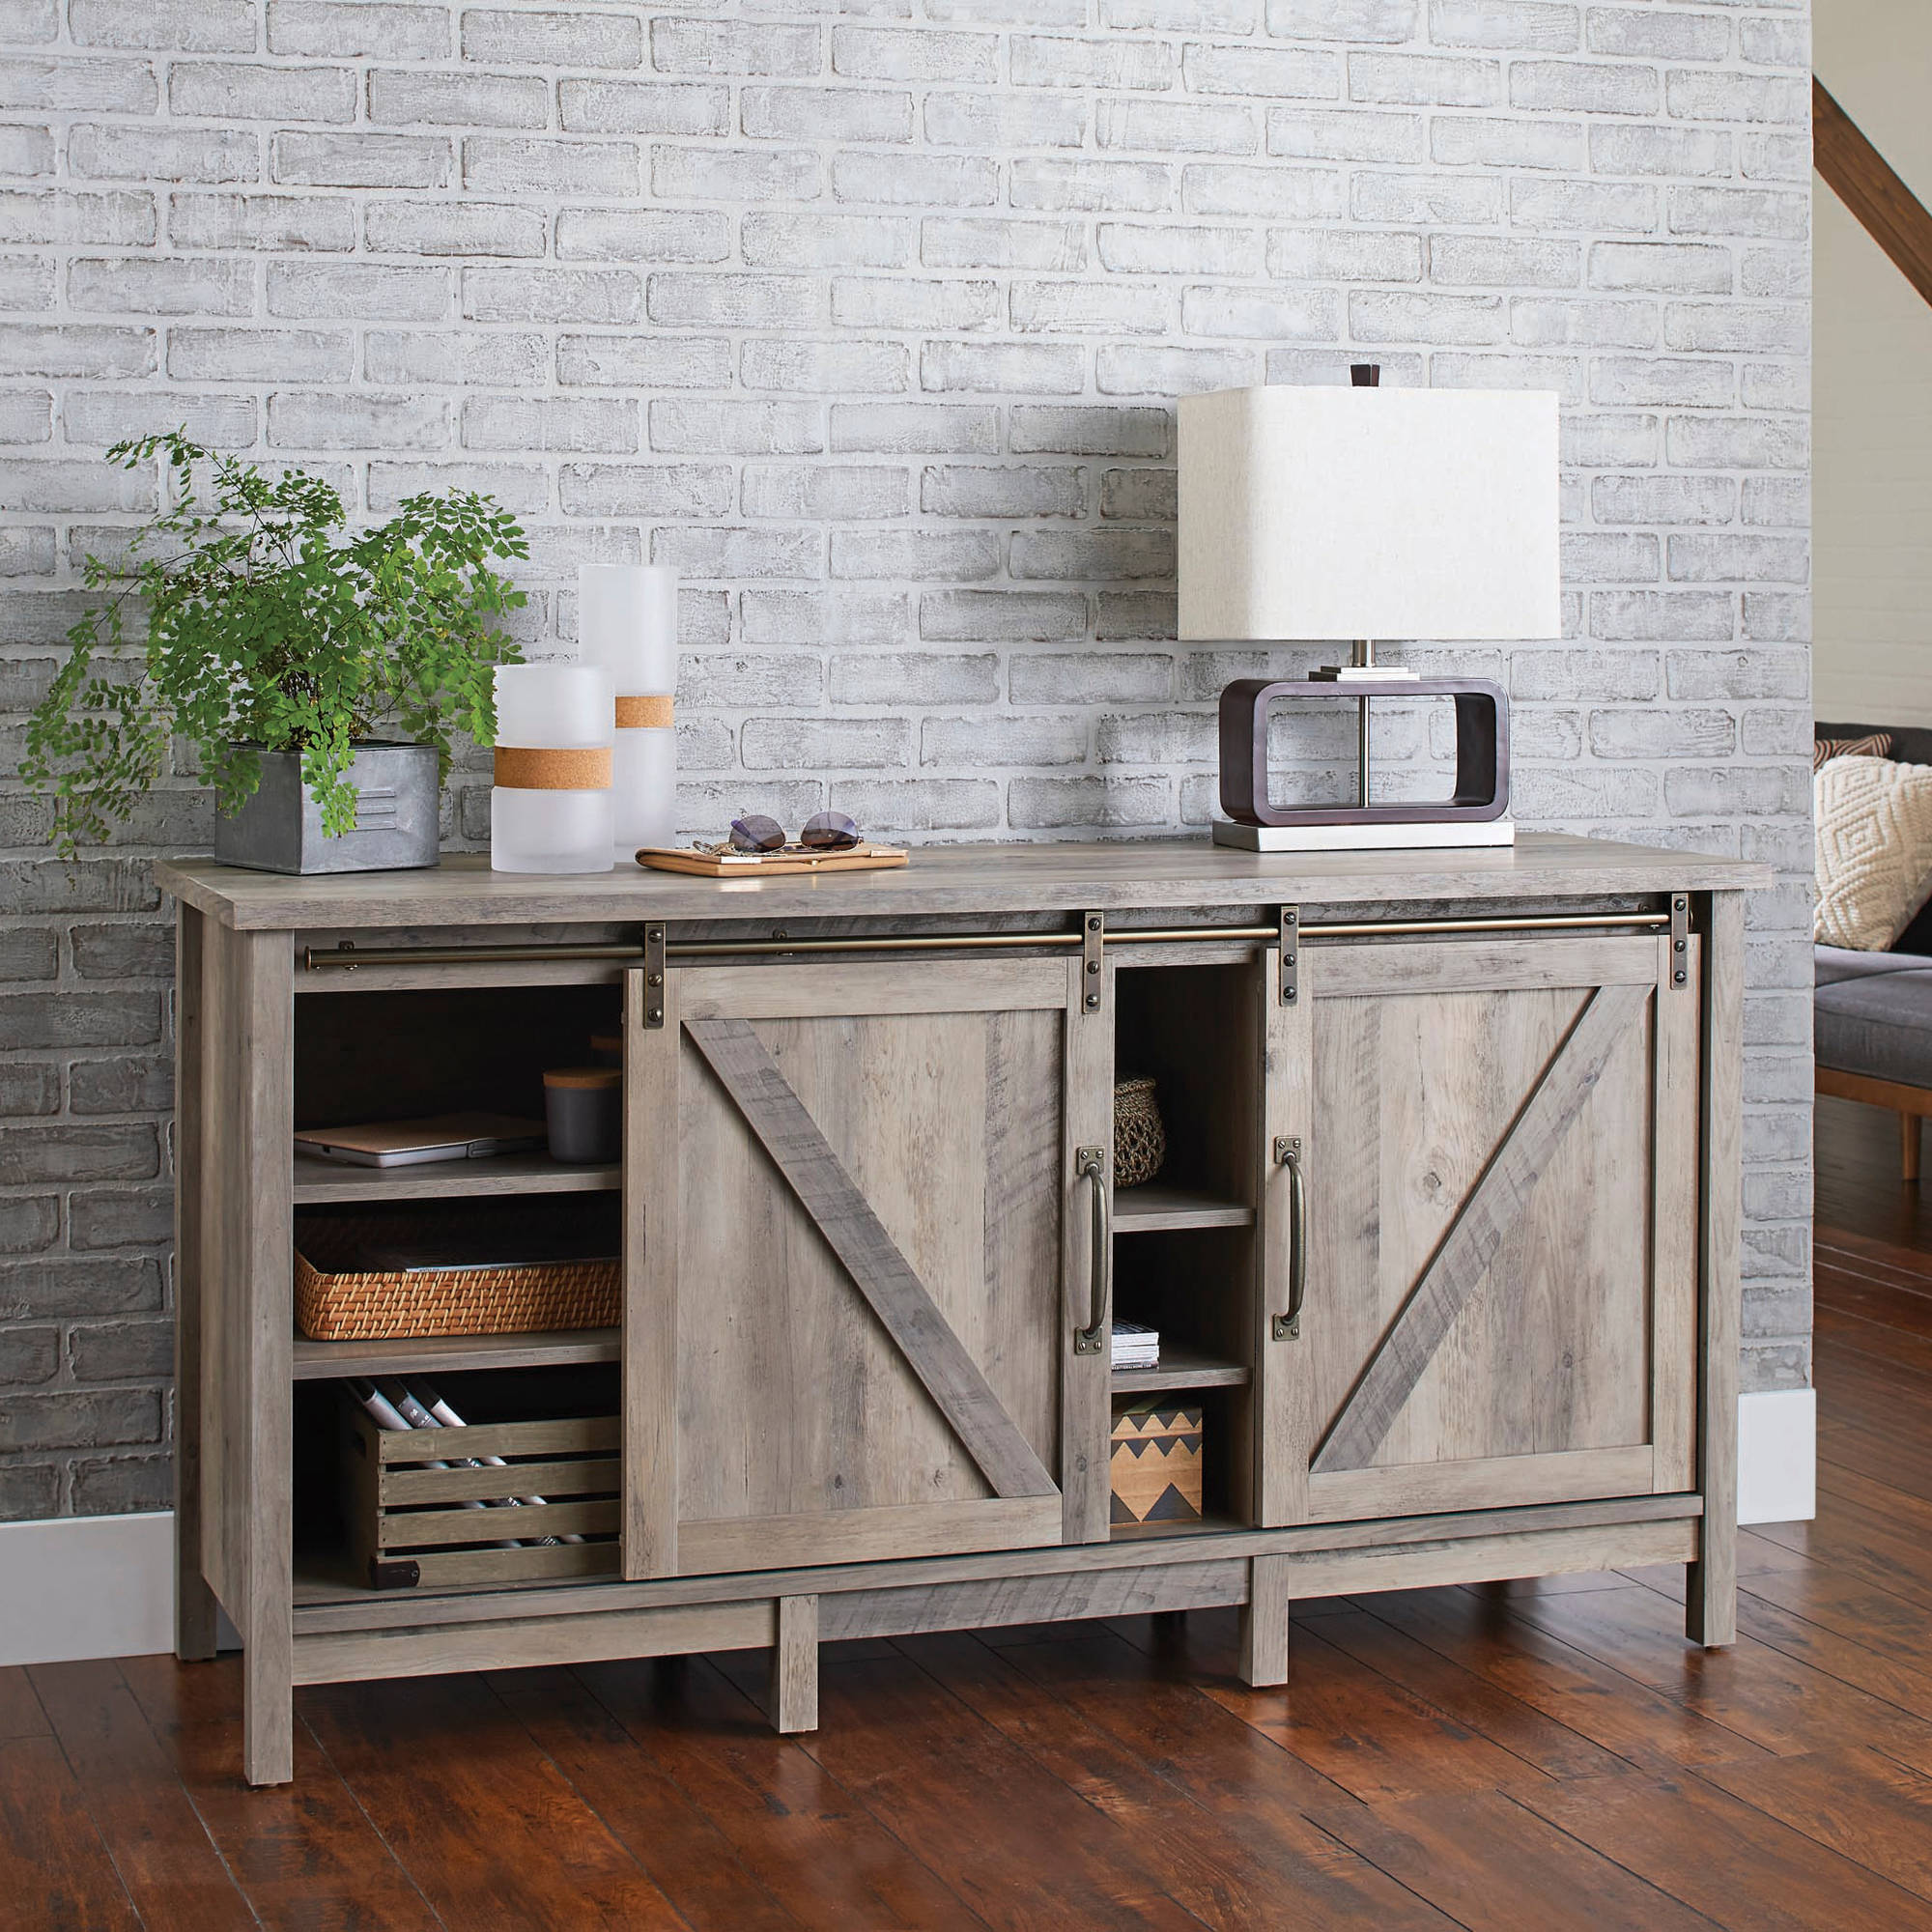 Better Homes & Gardens Modern Farmhouse TV Stand for TVs up to 70", Rustic Gray - image 3 of 14